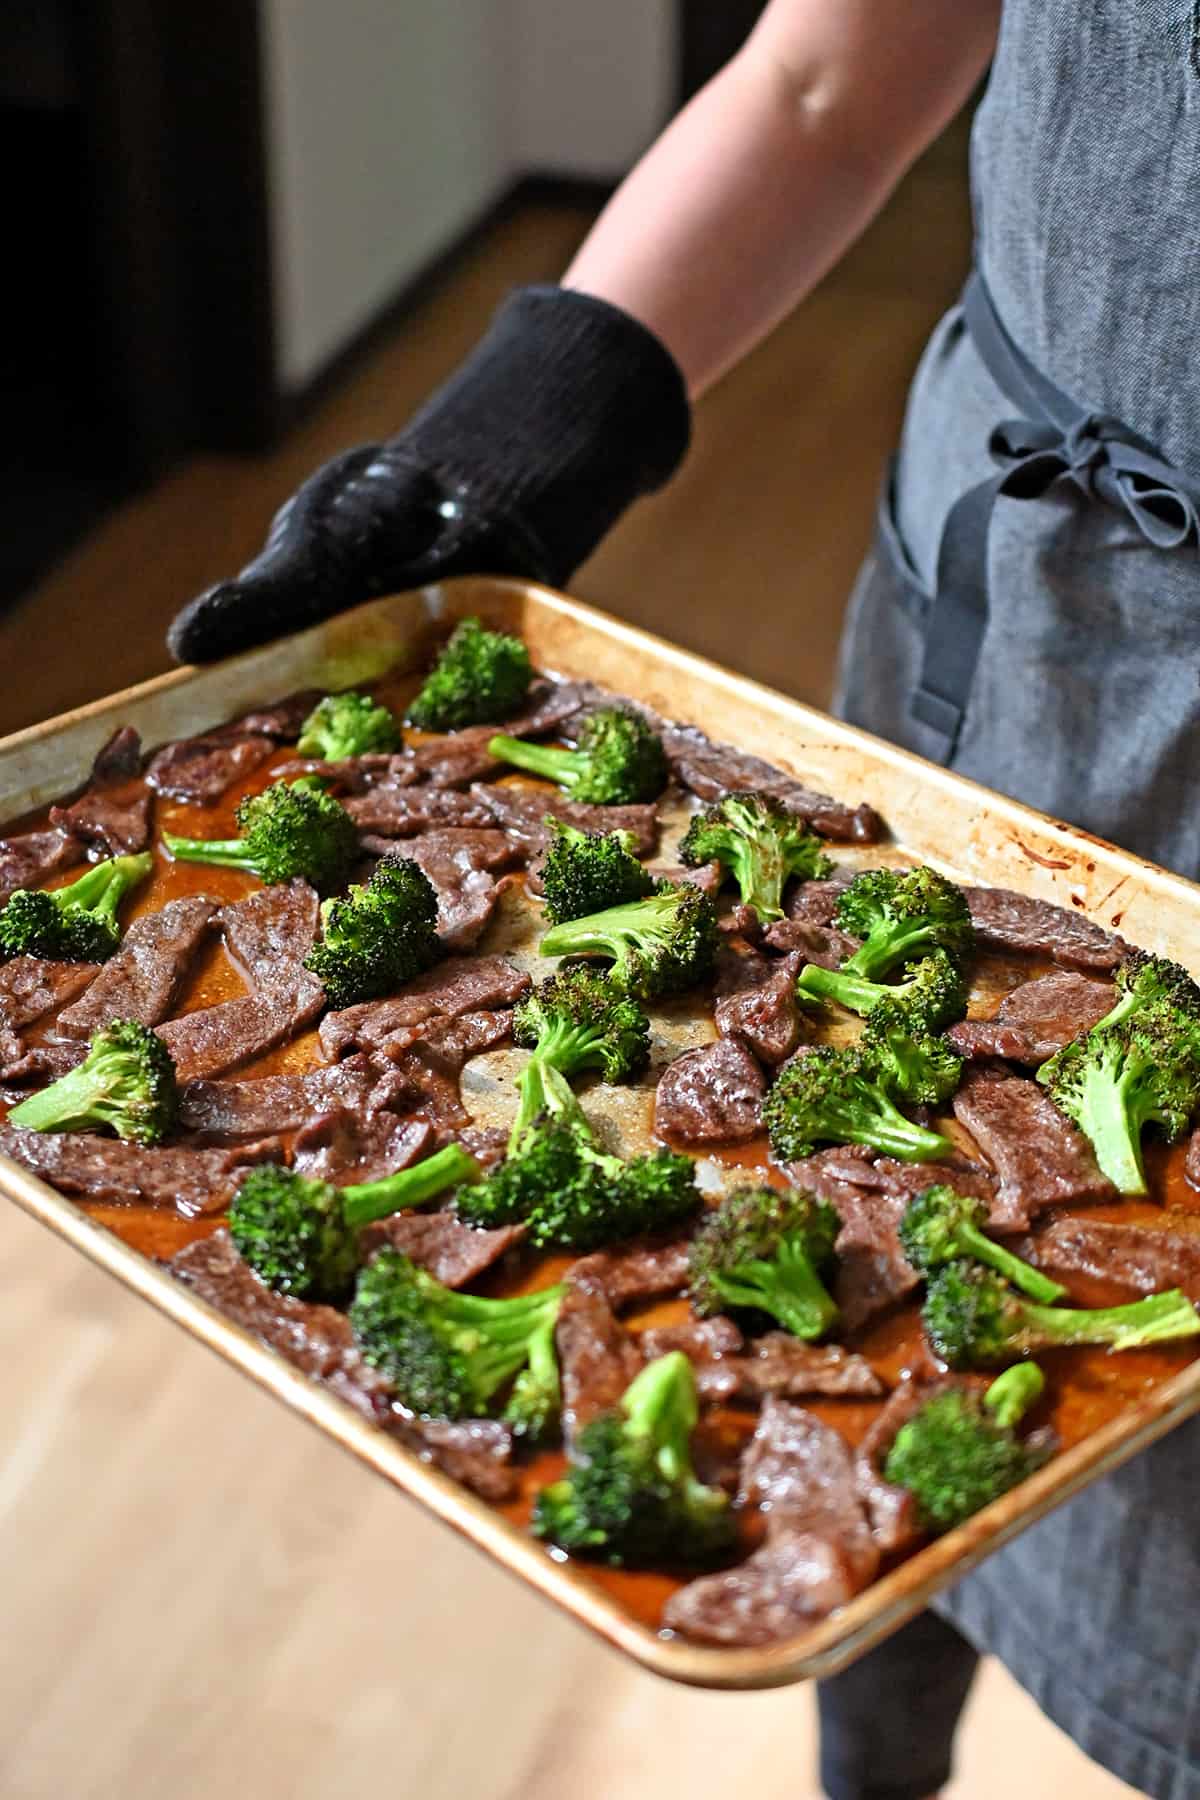 A rimmed baking sheet filled with Chinese beef and broccoli right out of the oven.